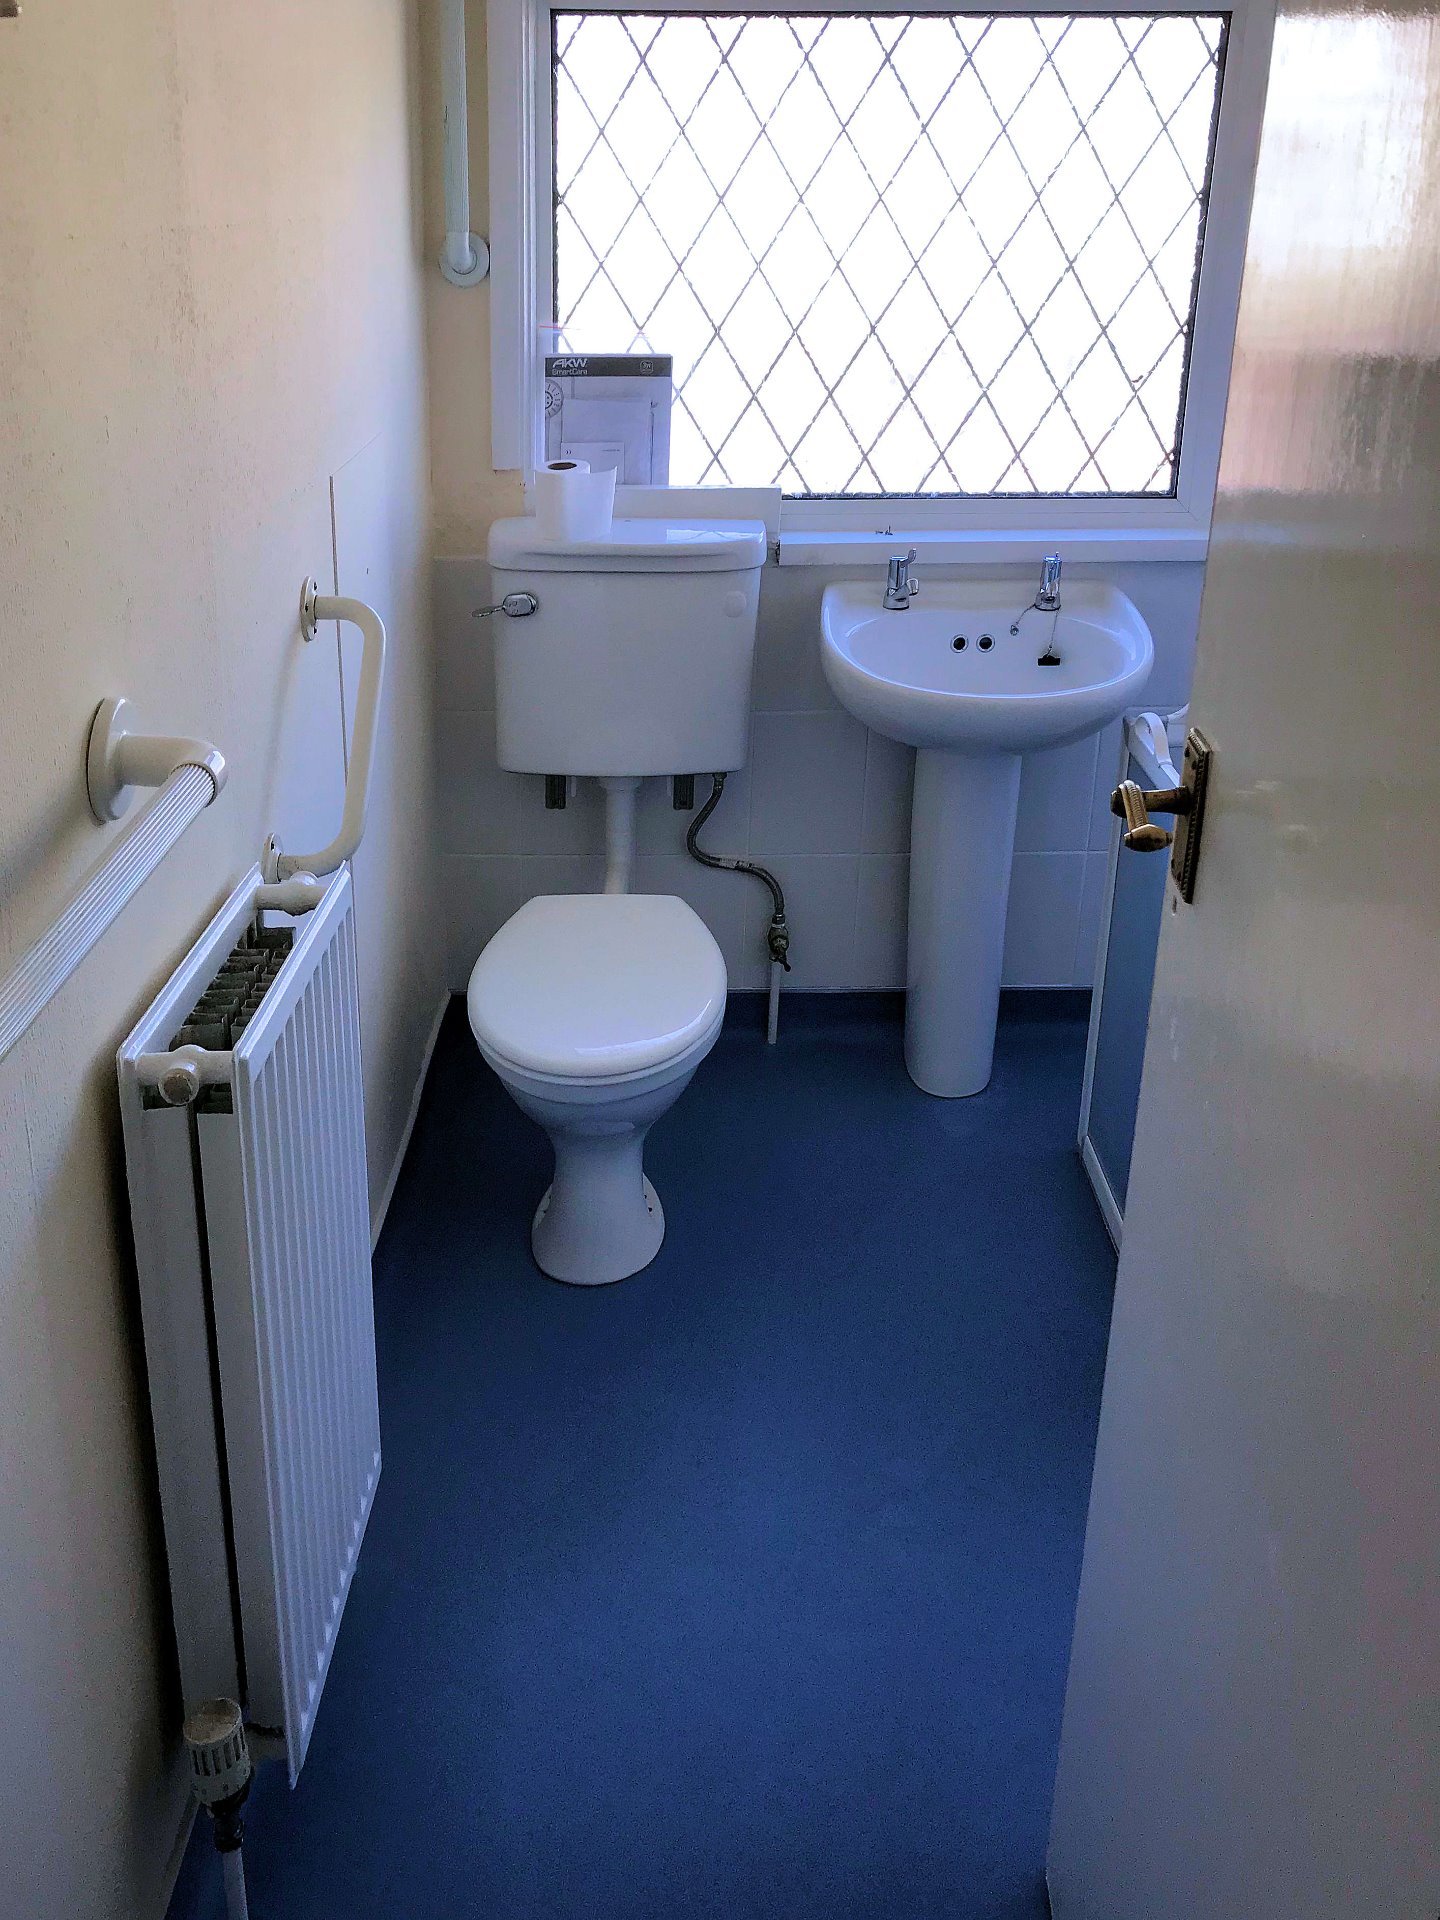 Modern bathroom suite installation ease of access and use Barnstaple